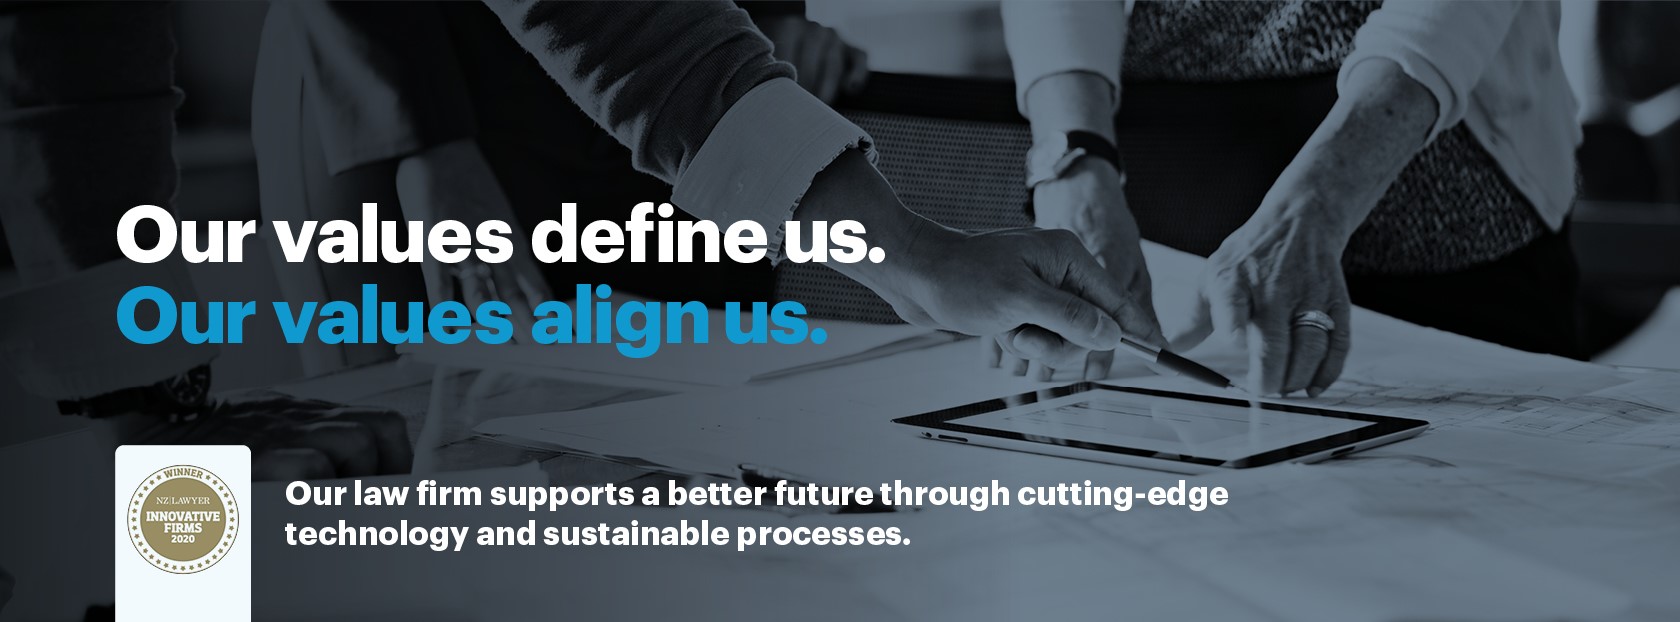 Our law firm supports a better future through cutting-edge technology and sustainable processes